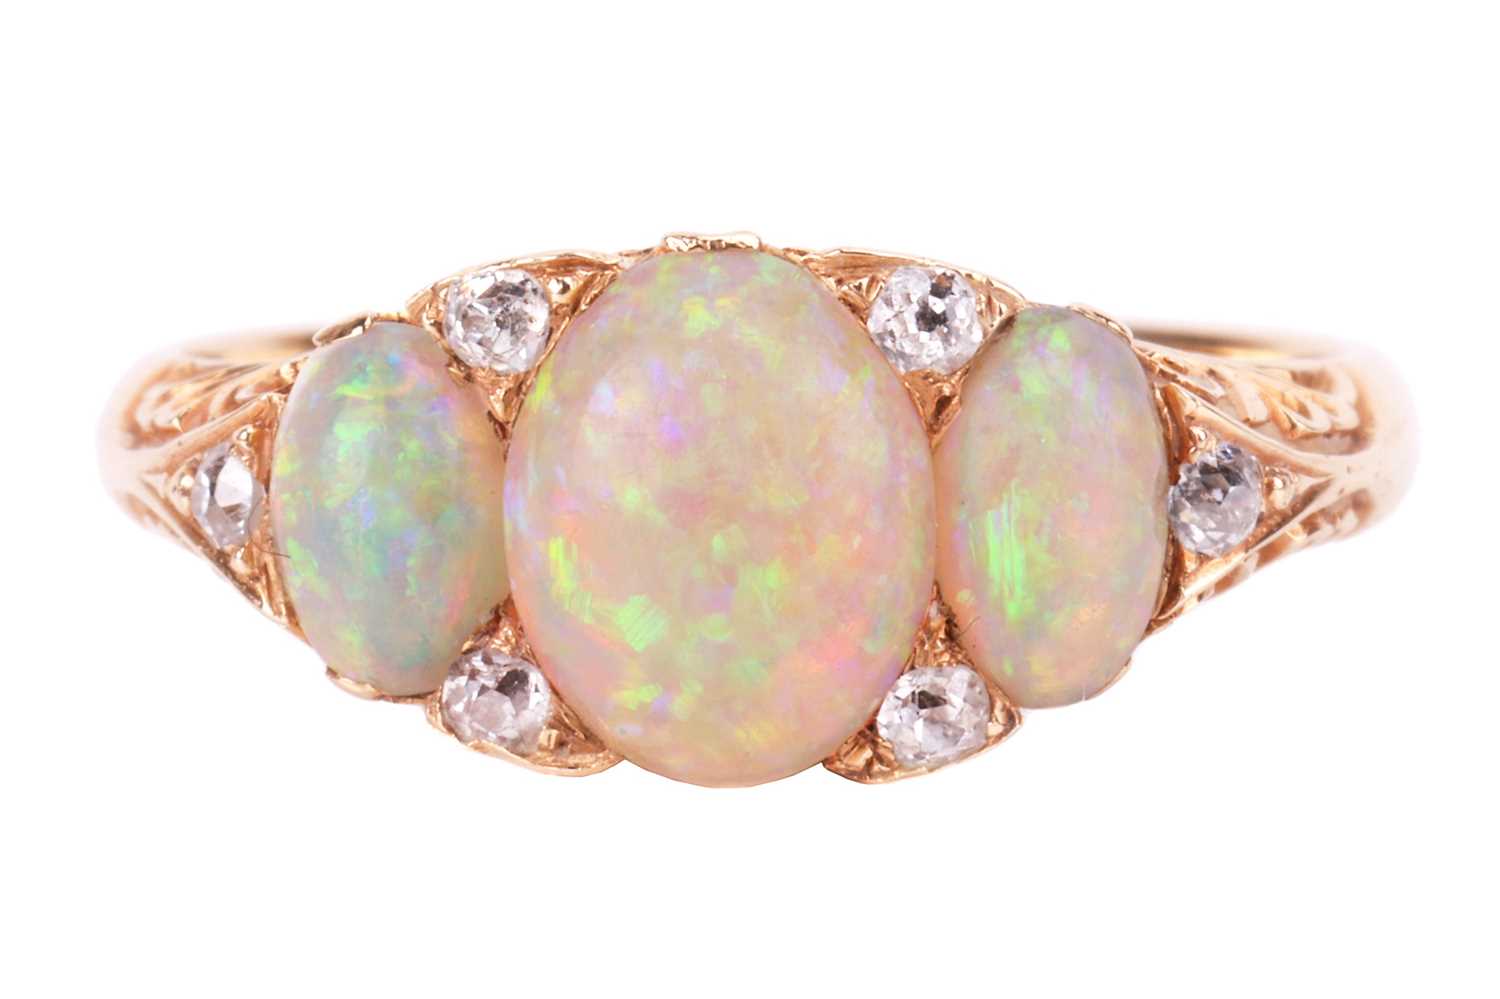 An opal and diamond half-hoop ring, featuring three graduated oval cabochons, displaying spectral pl